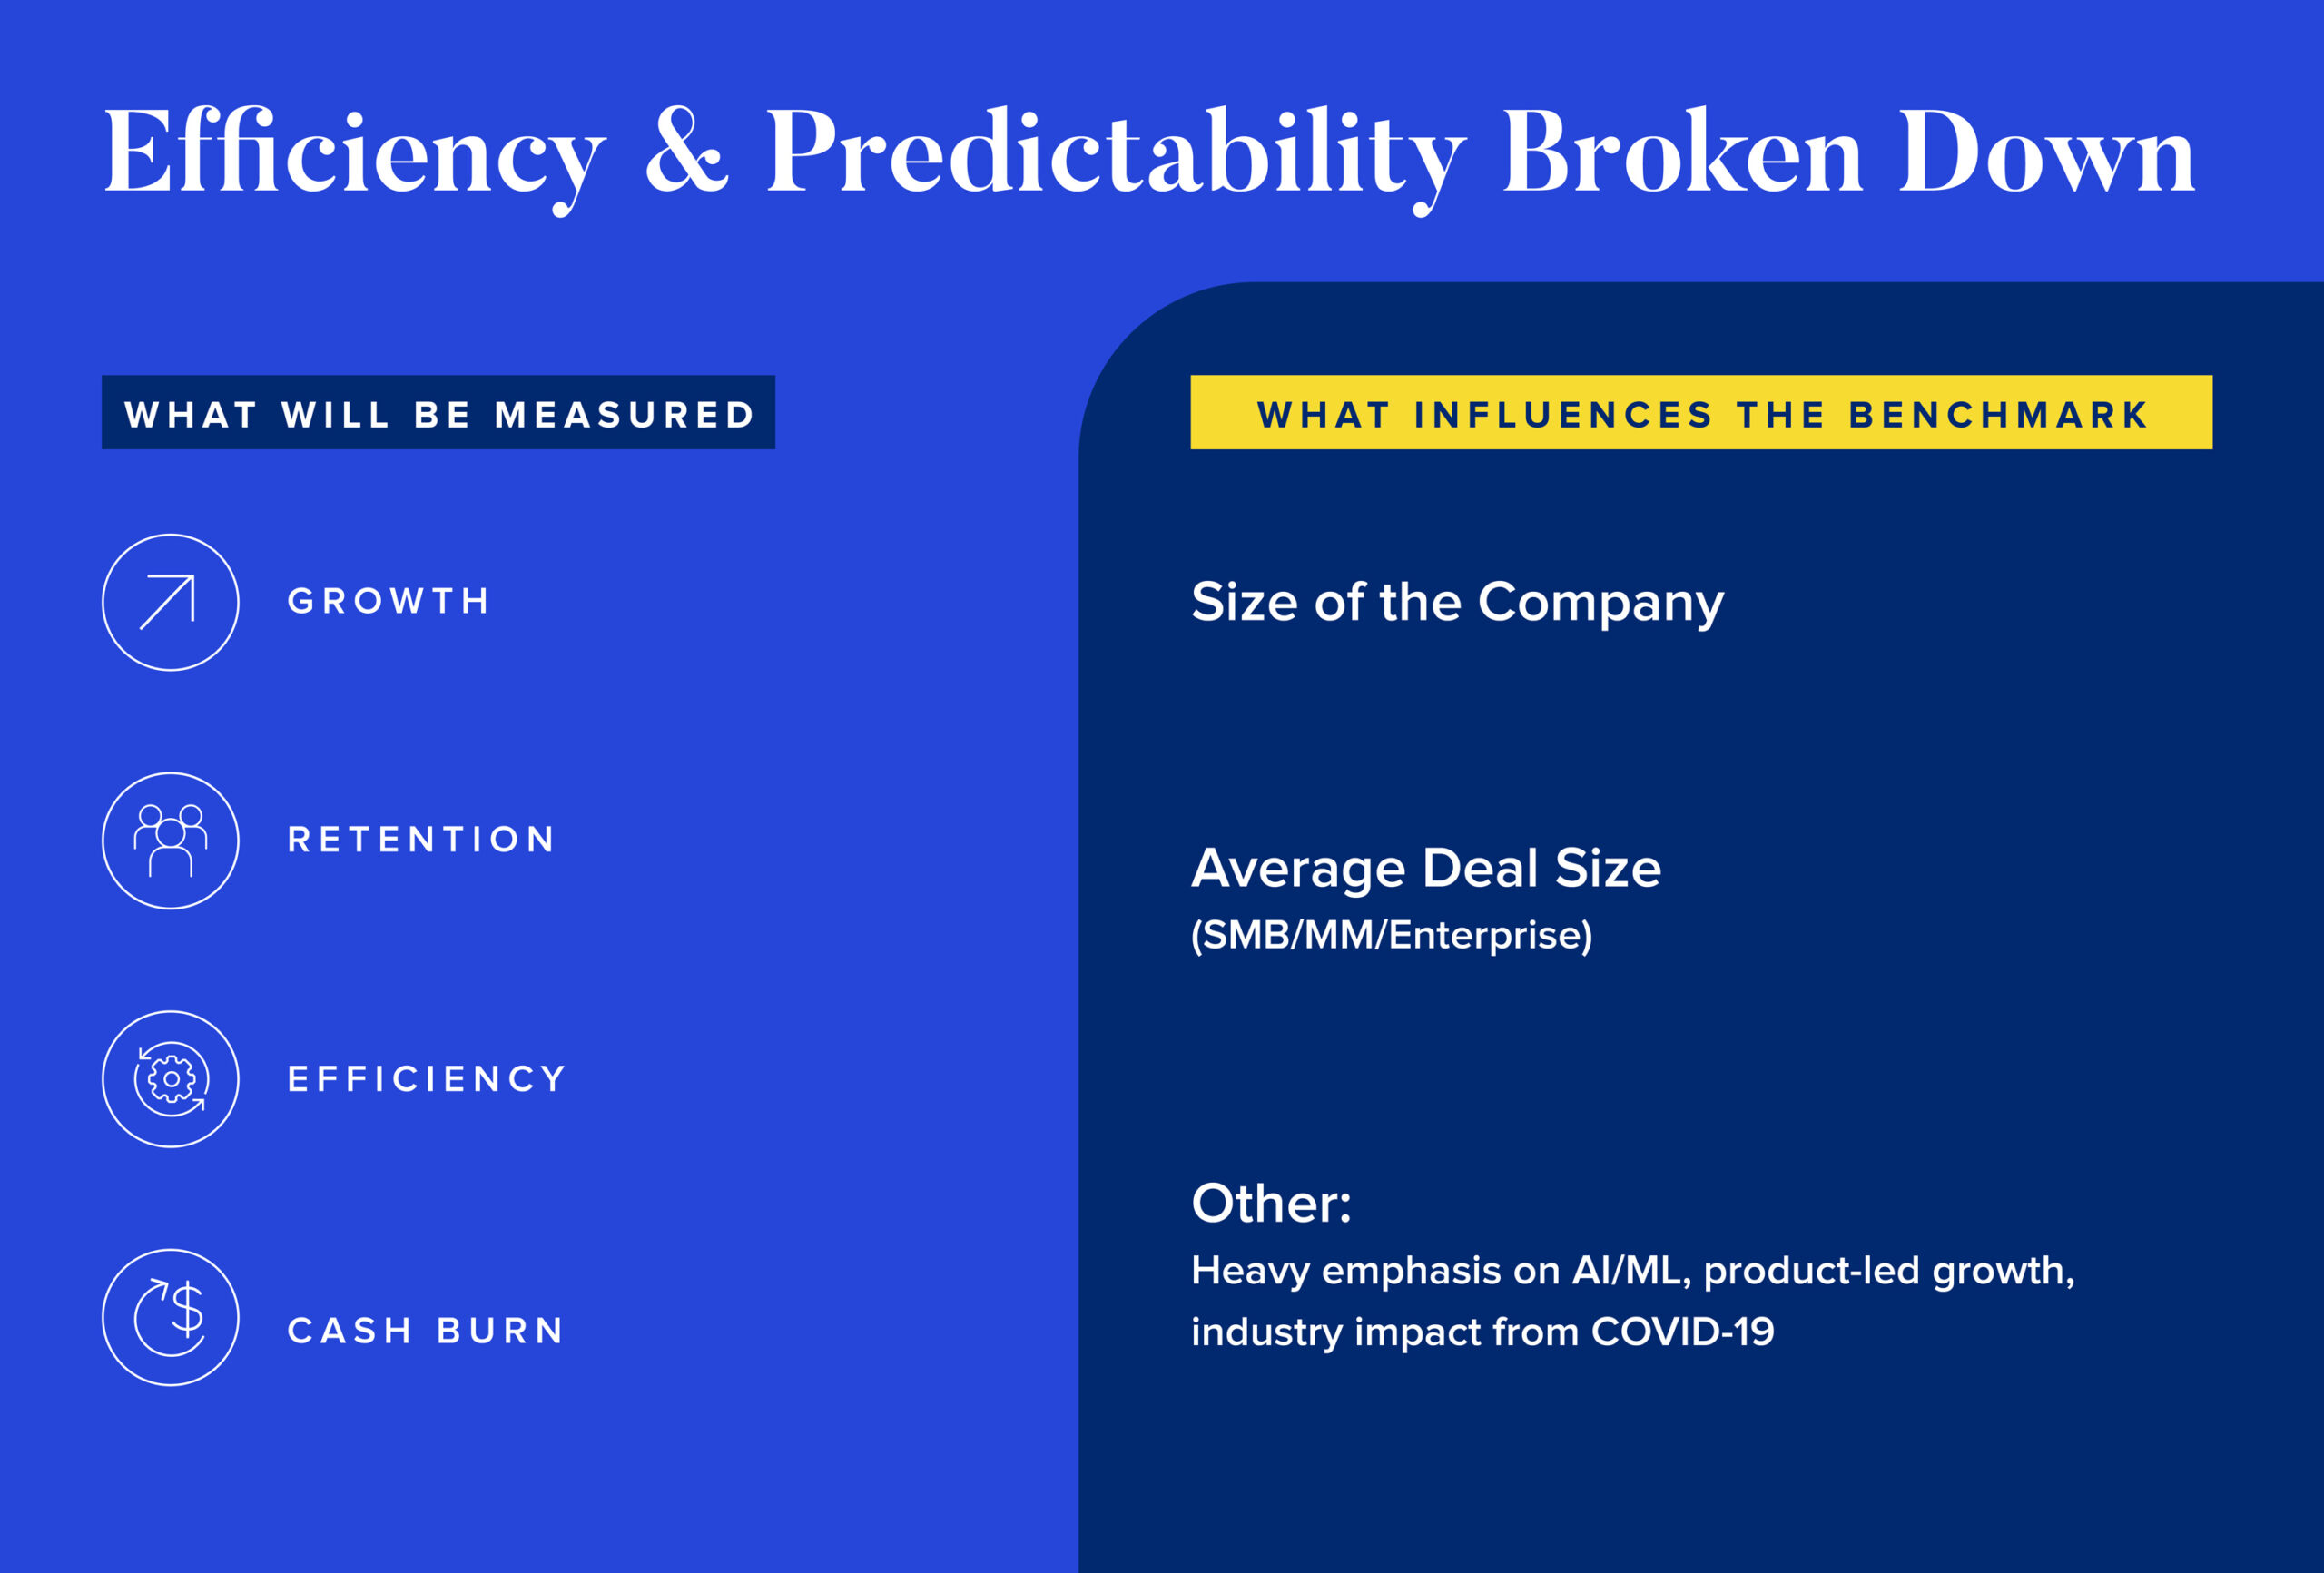 Efficiency & predictability broken down. What will be measured: growth, retention, efficiency, cash burn. What influences the benchmark: size of company, average deal size, other